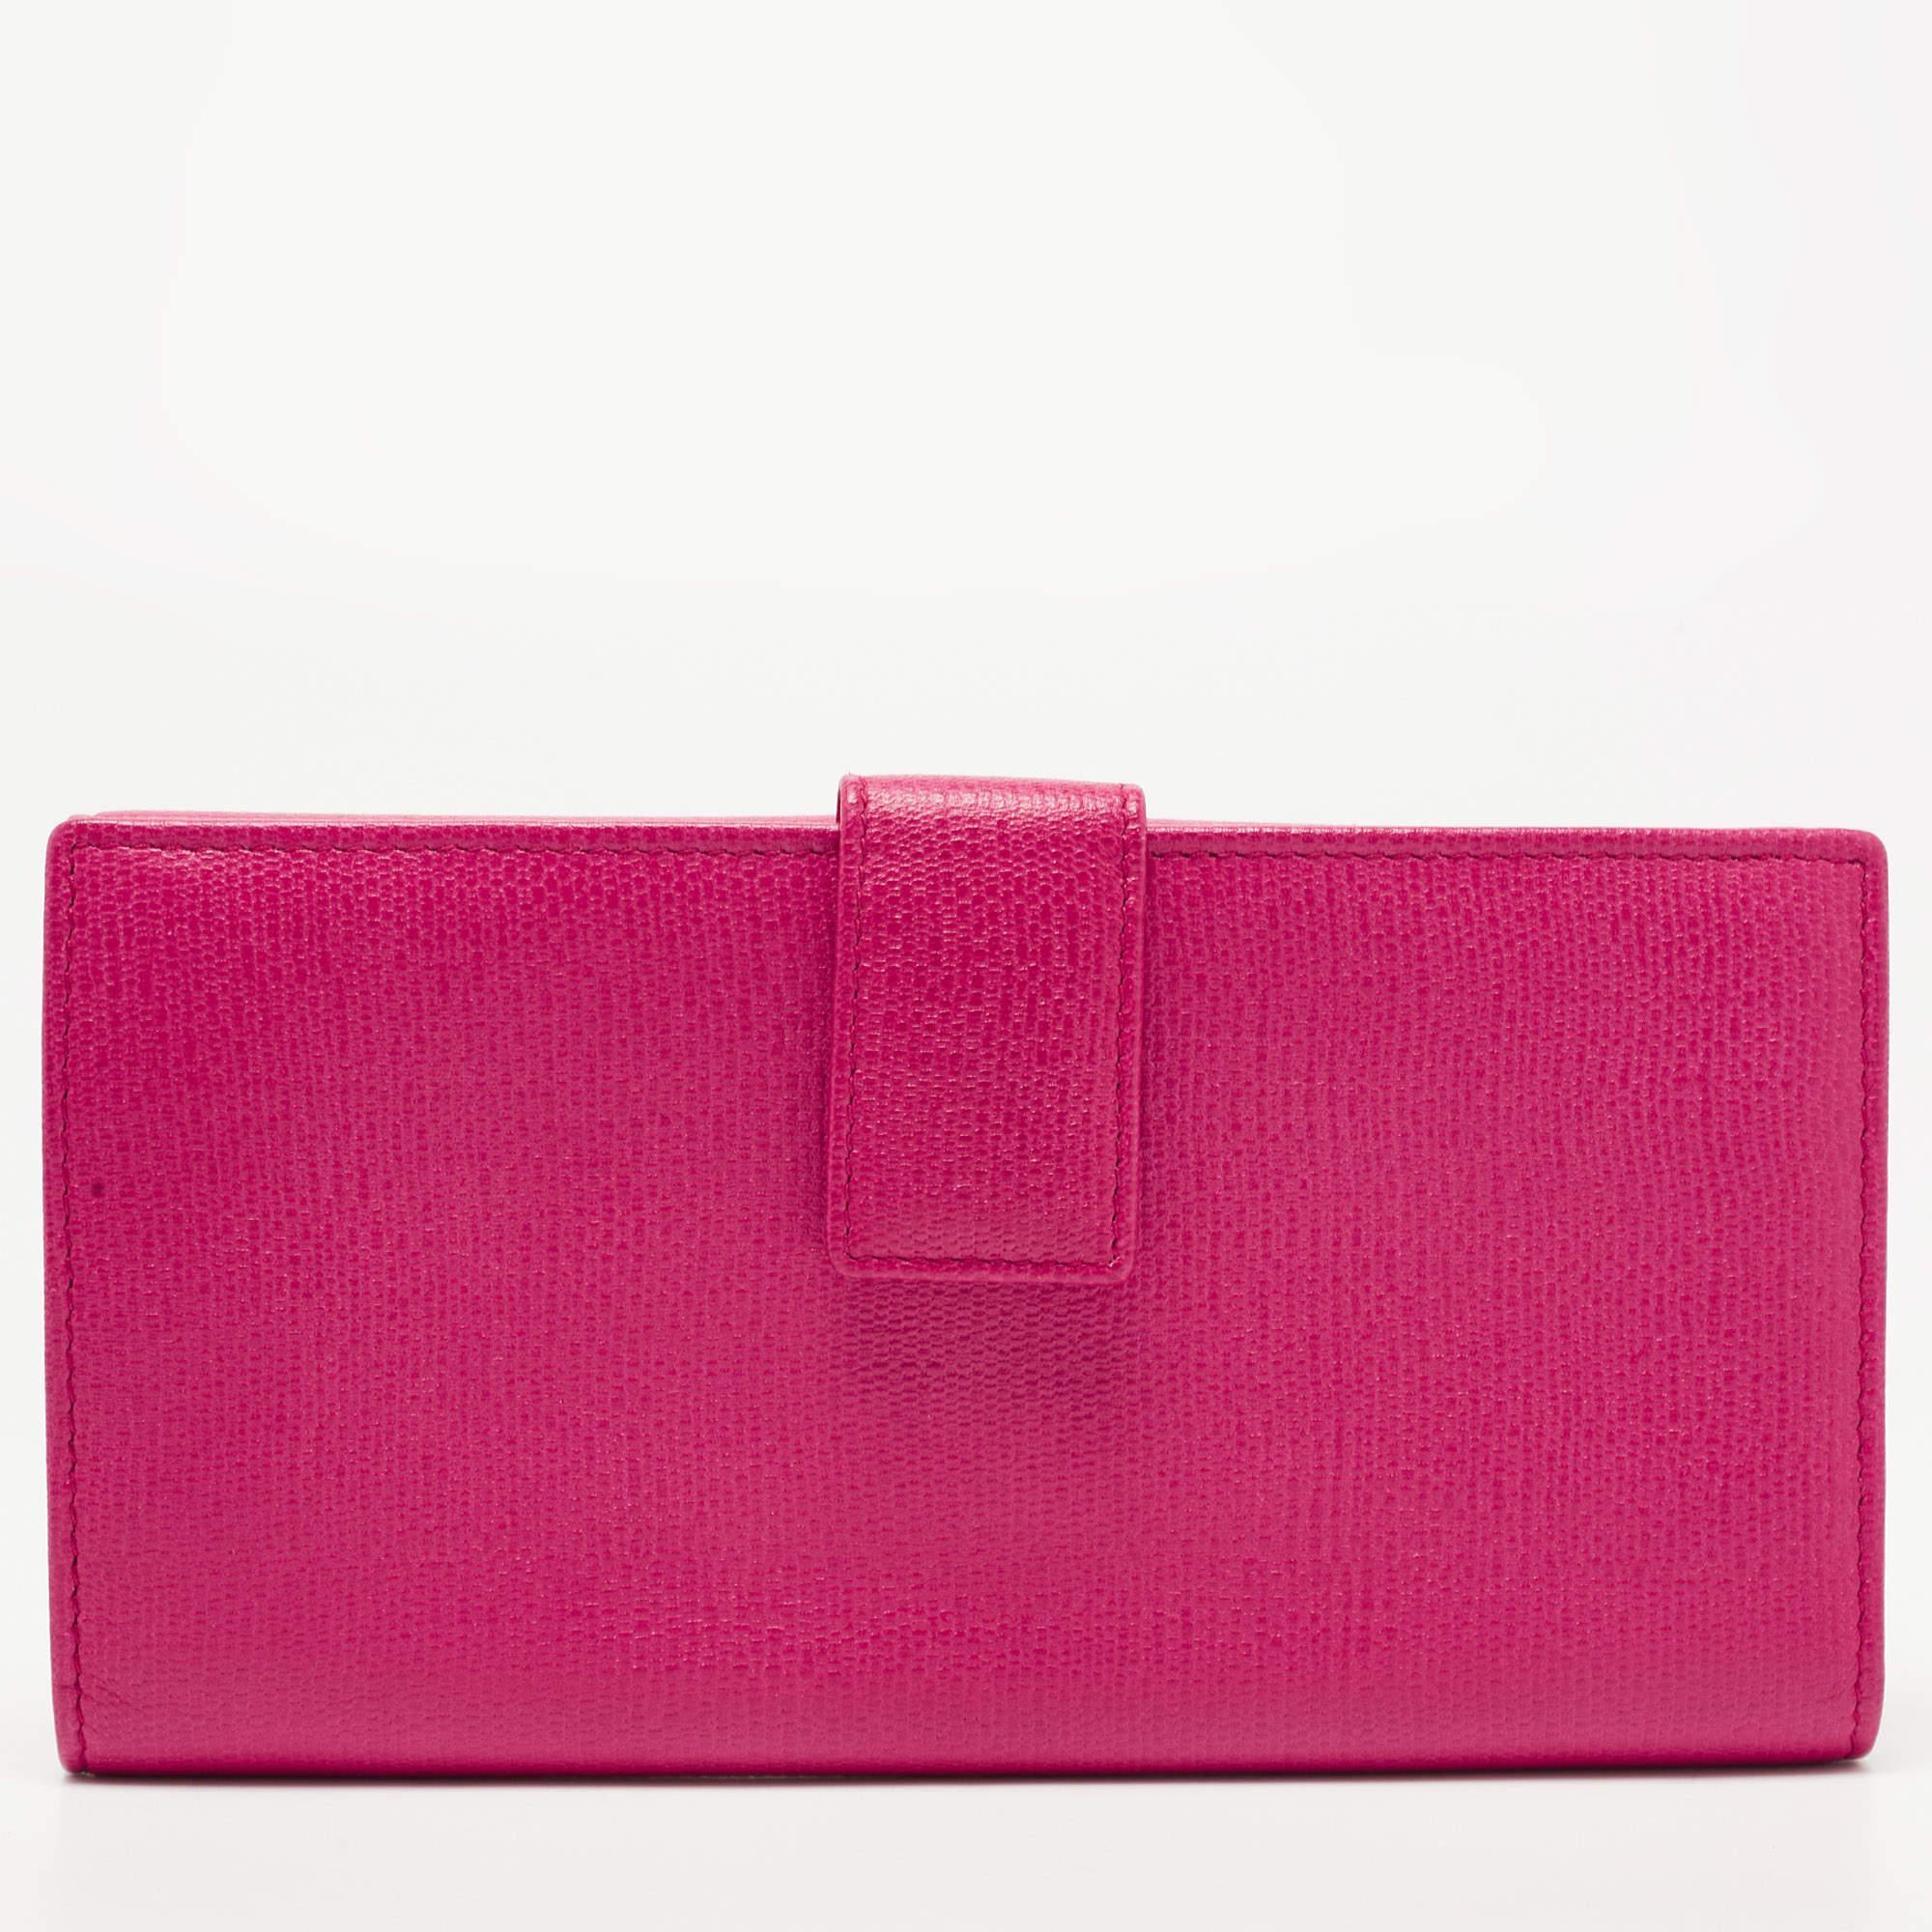 Crafted from leather, this luxurious Saint Laurent Paris wallet is a beauty not to be missed! The shiny pink color exterior features a front flap with the branded charm and a snap closure. It opens up to a fabric-lined interior with multiple slots.

